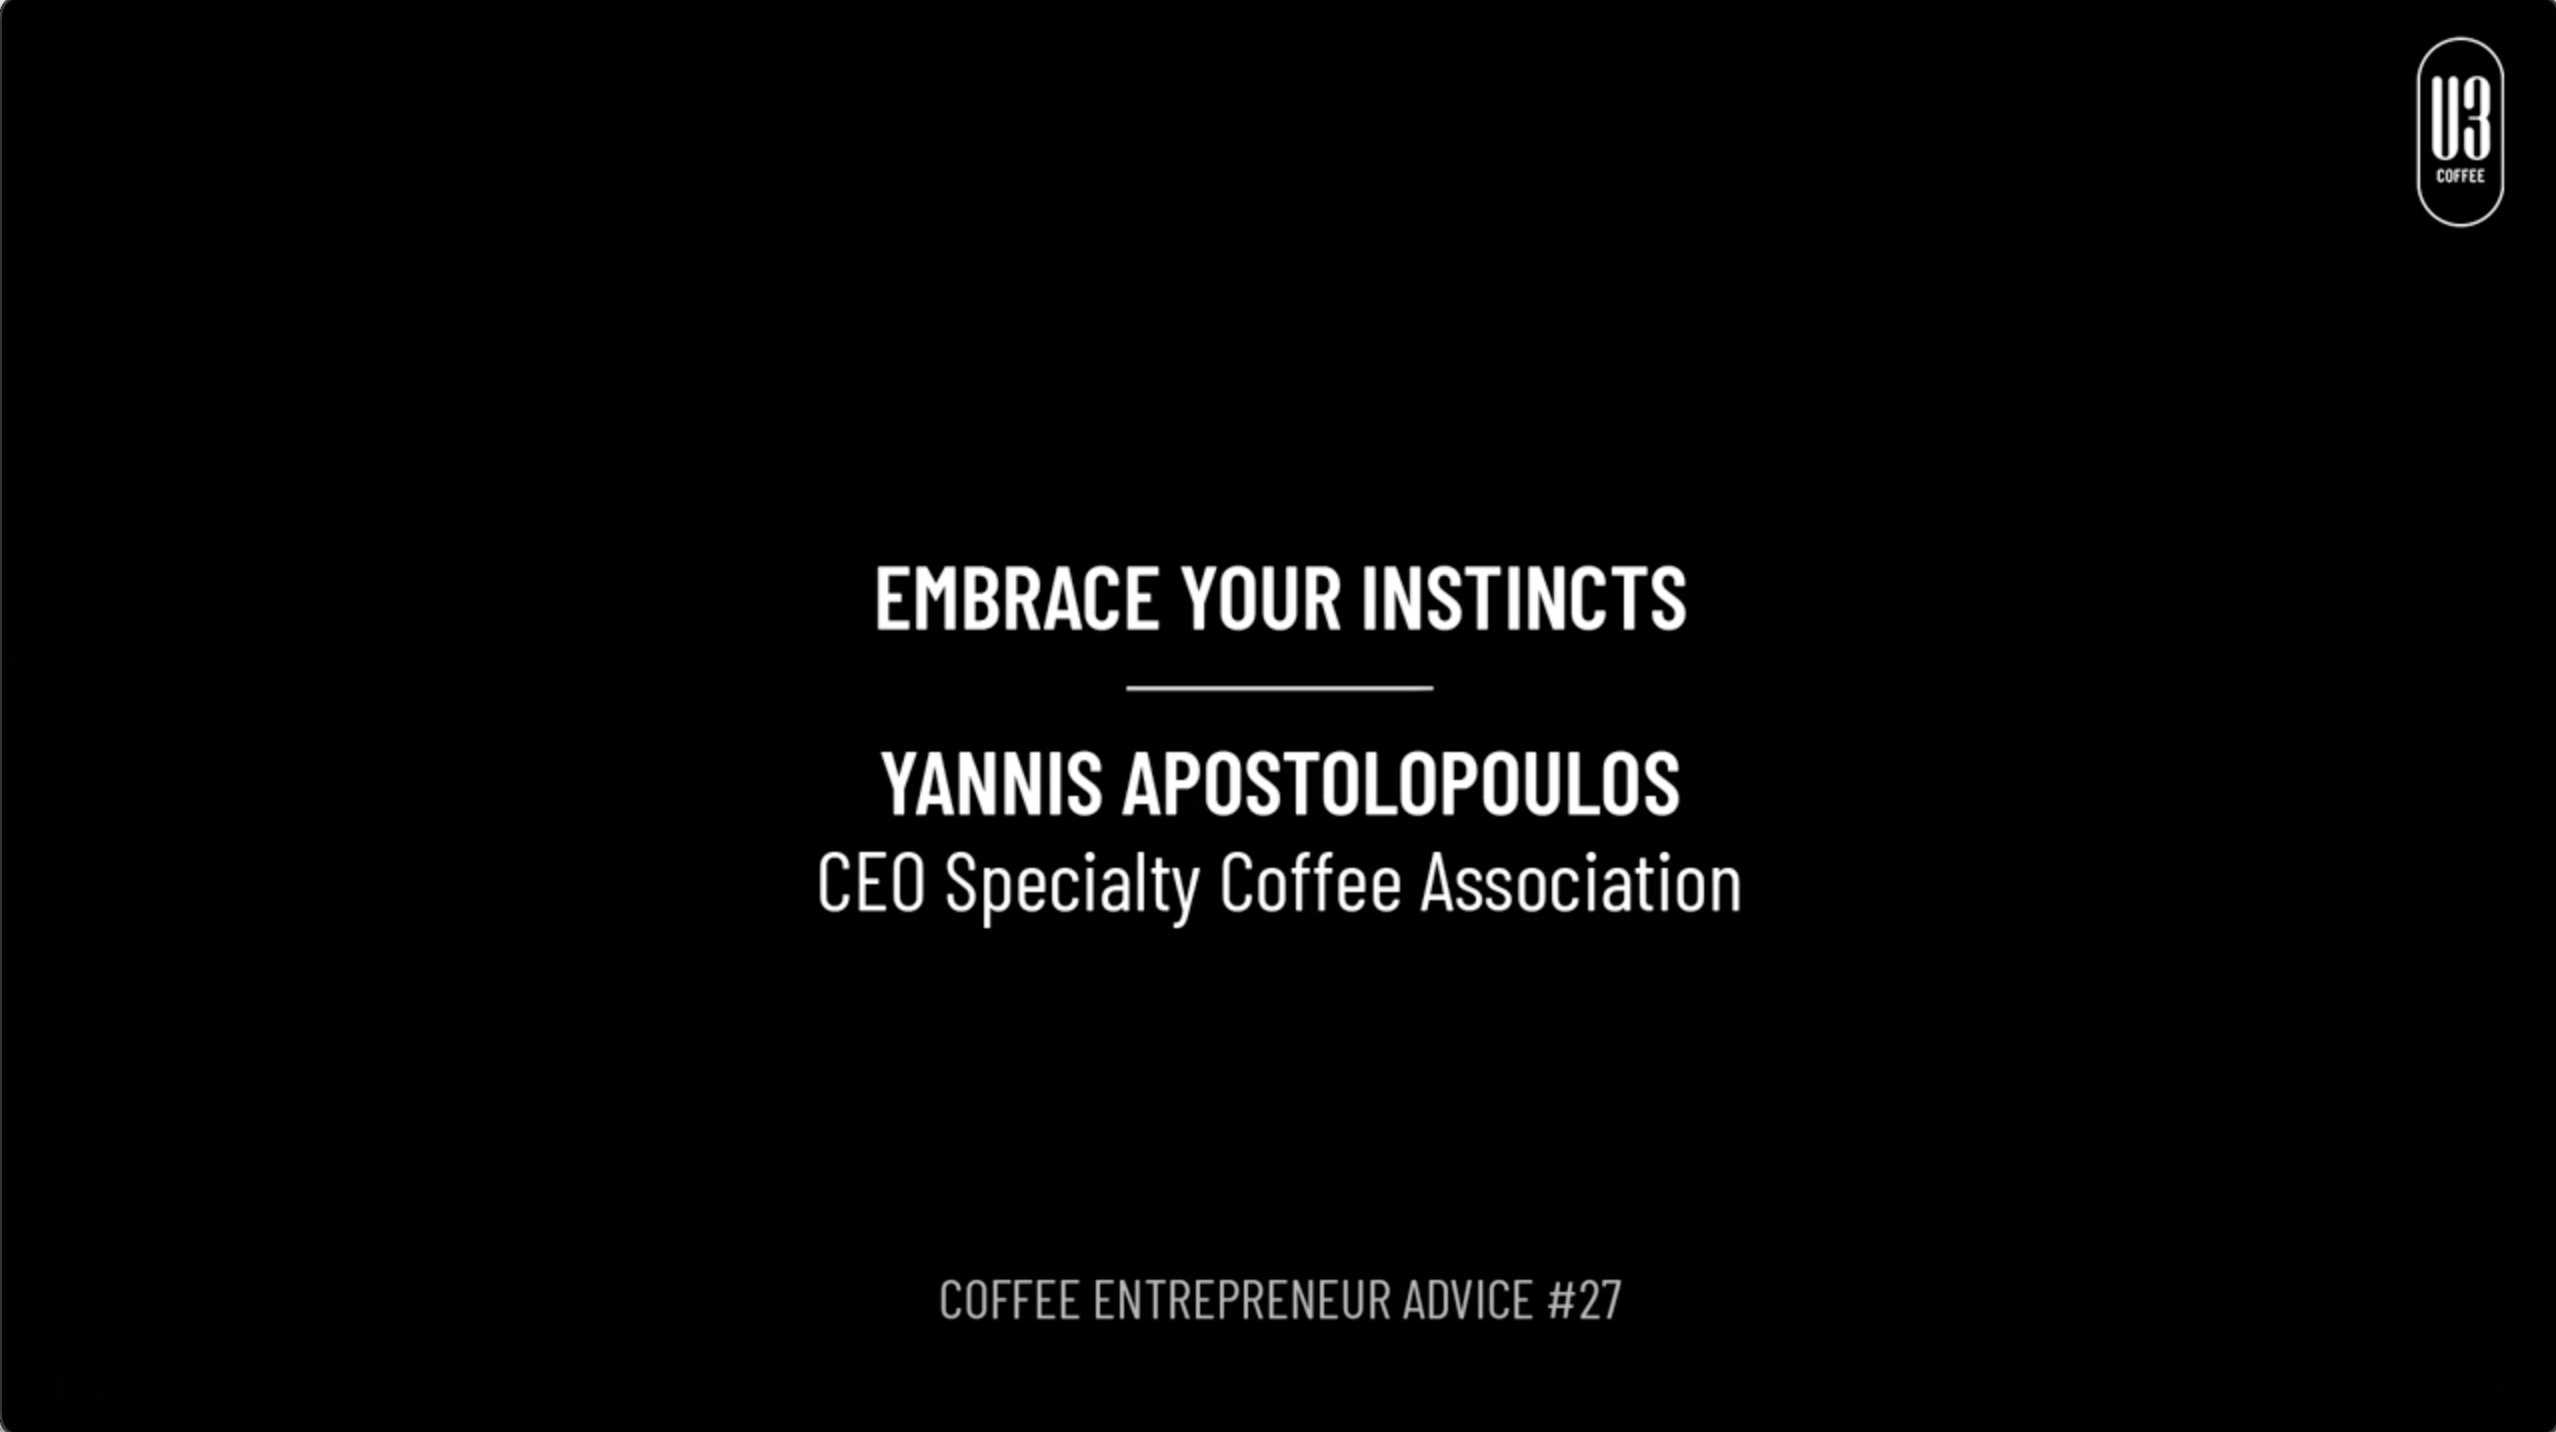 #27 Coffee Entrepreneur Advice: Yannis Apostolopoulos, CEO of the Specialty Coffee Association gives his advice on embracing your instincts.